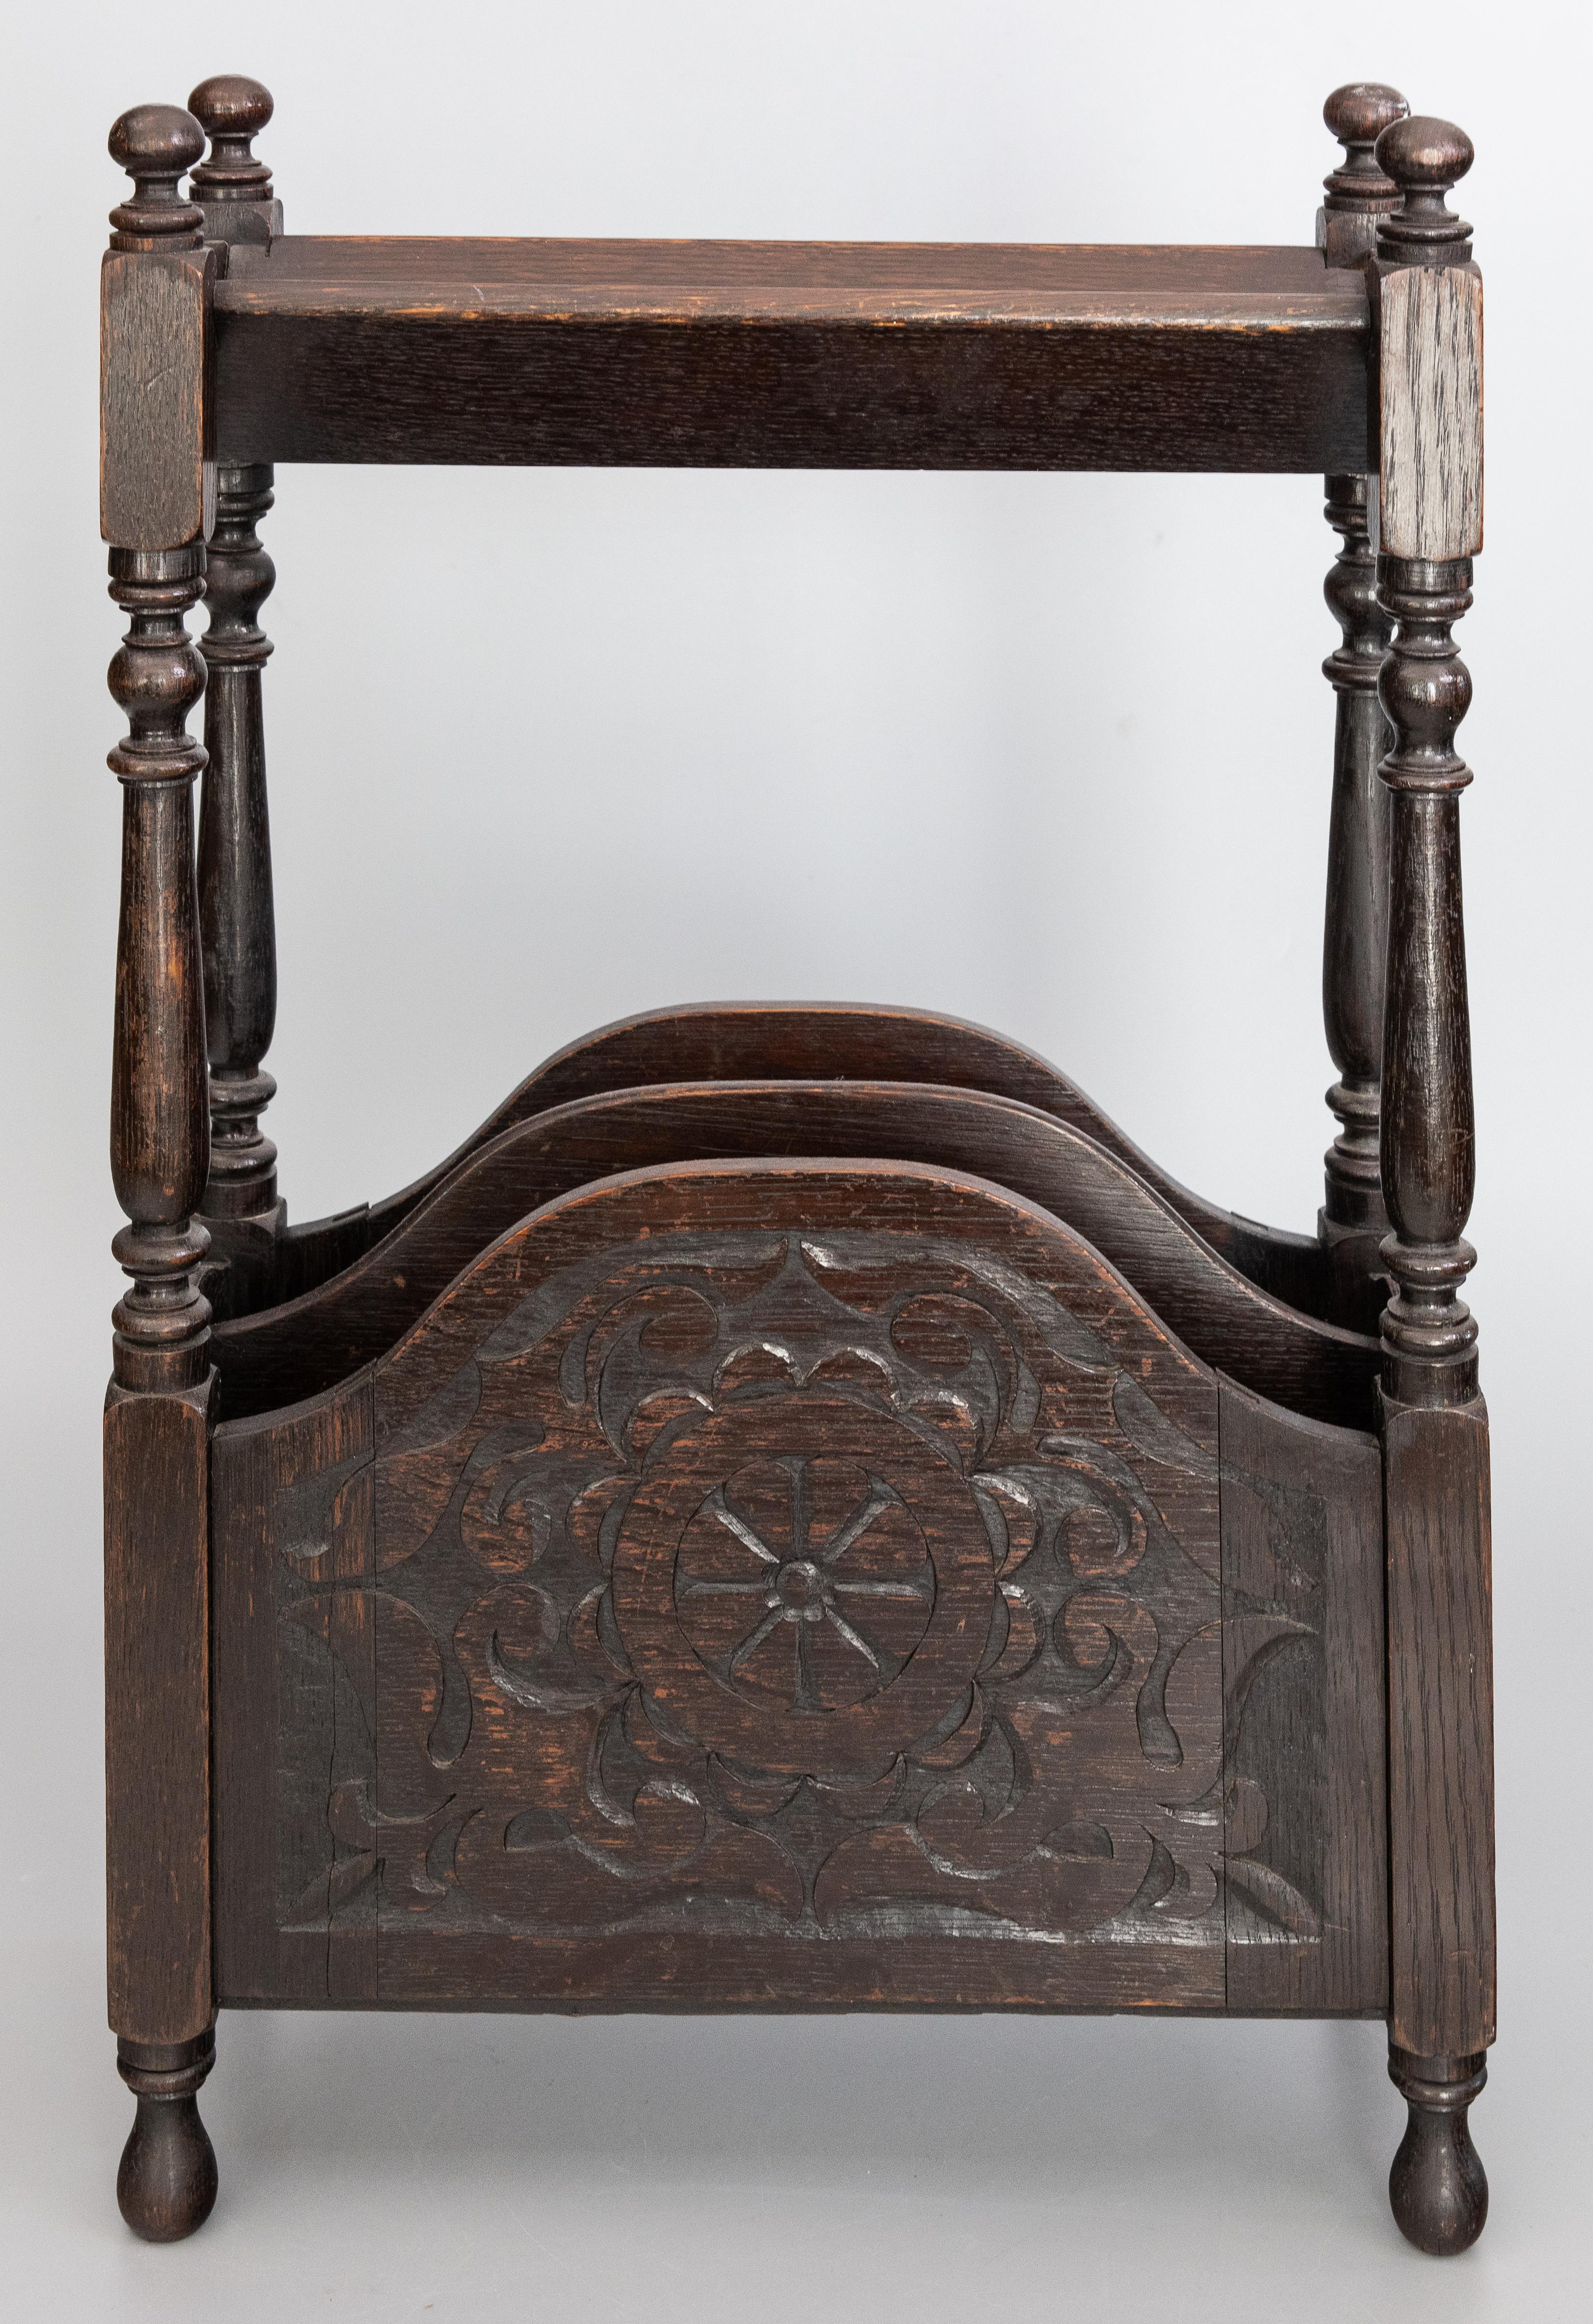 Antique English Carved Oak Library Book Trough and Magazine Rack Stand, c. 1910 In Good Condition For Sale In Pearland, TX